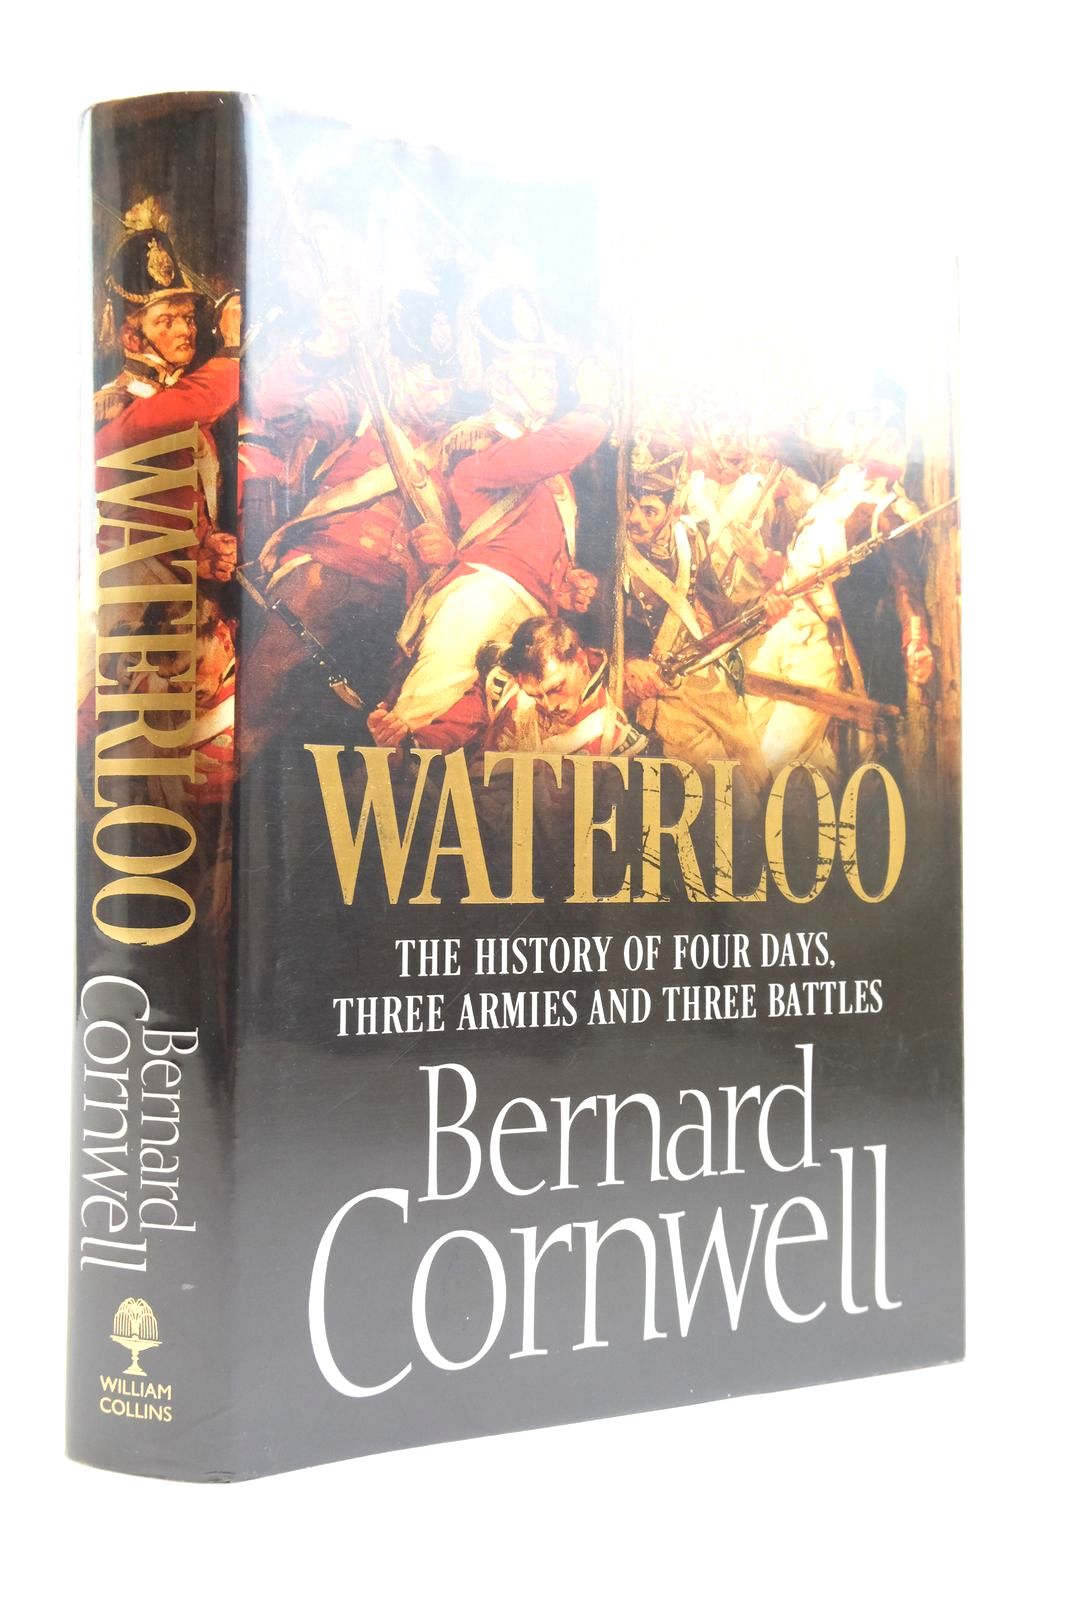 Photo of WATERLOO THE HISTORY OF FOUR DAYS, THREE ARMIES AND THREE BATTLES written by Cornwell, Bernard published by William Collins (STOCK CODE: 2135388)  for sale by Stella & Rose's Books